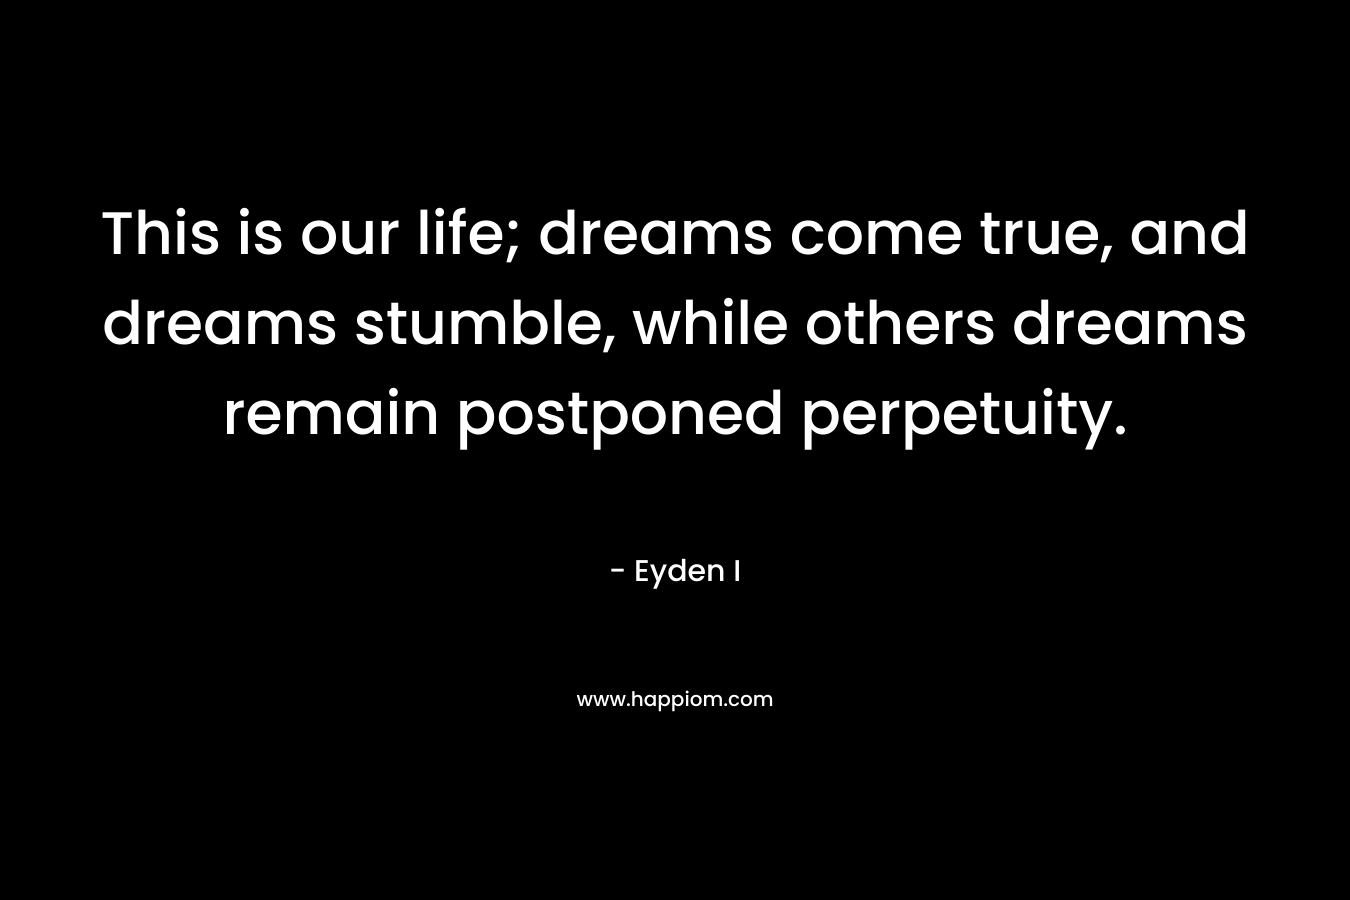 This is our life; dreams come true, and dreams stumble, while others dreams remain postponed perpetuity.